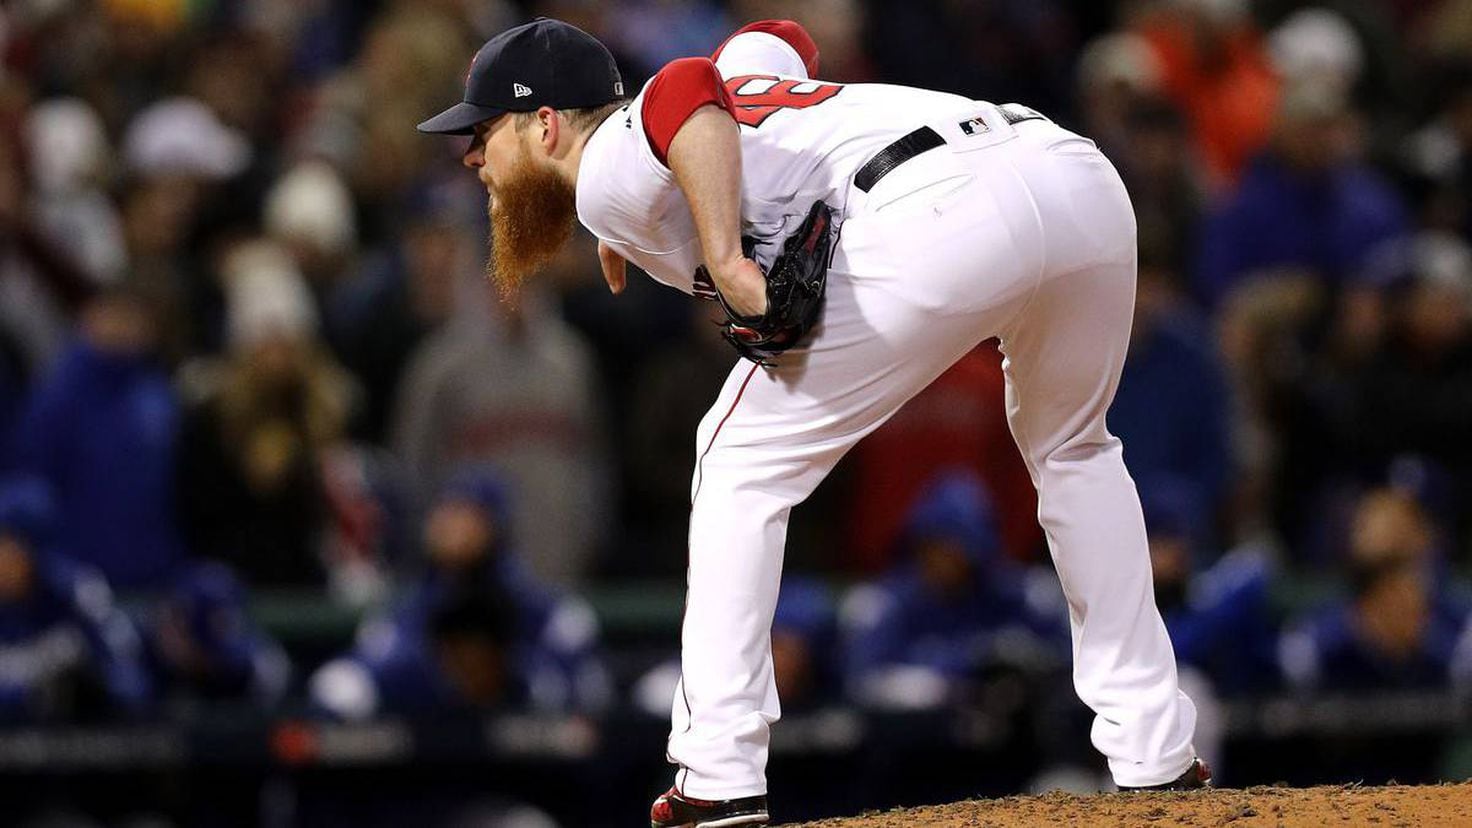 Kimbrel 8th pitcher in MLB history to earn 400 saves, Phillies